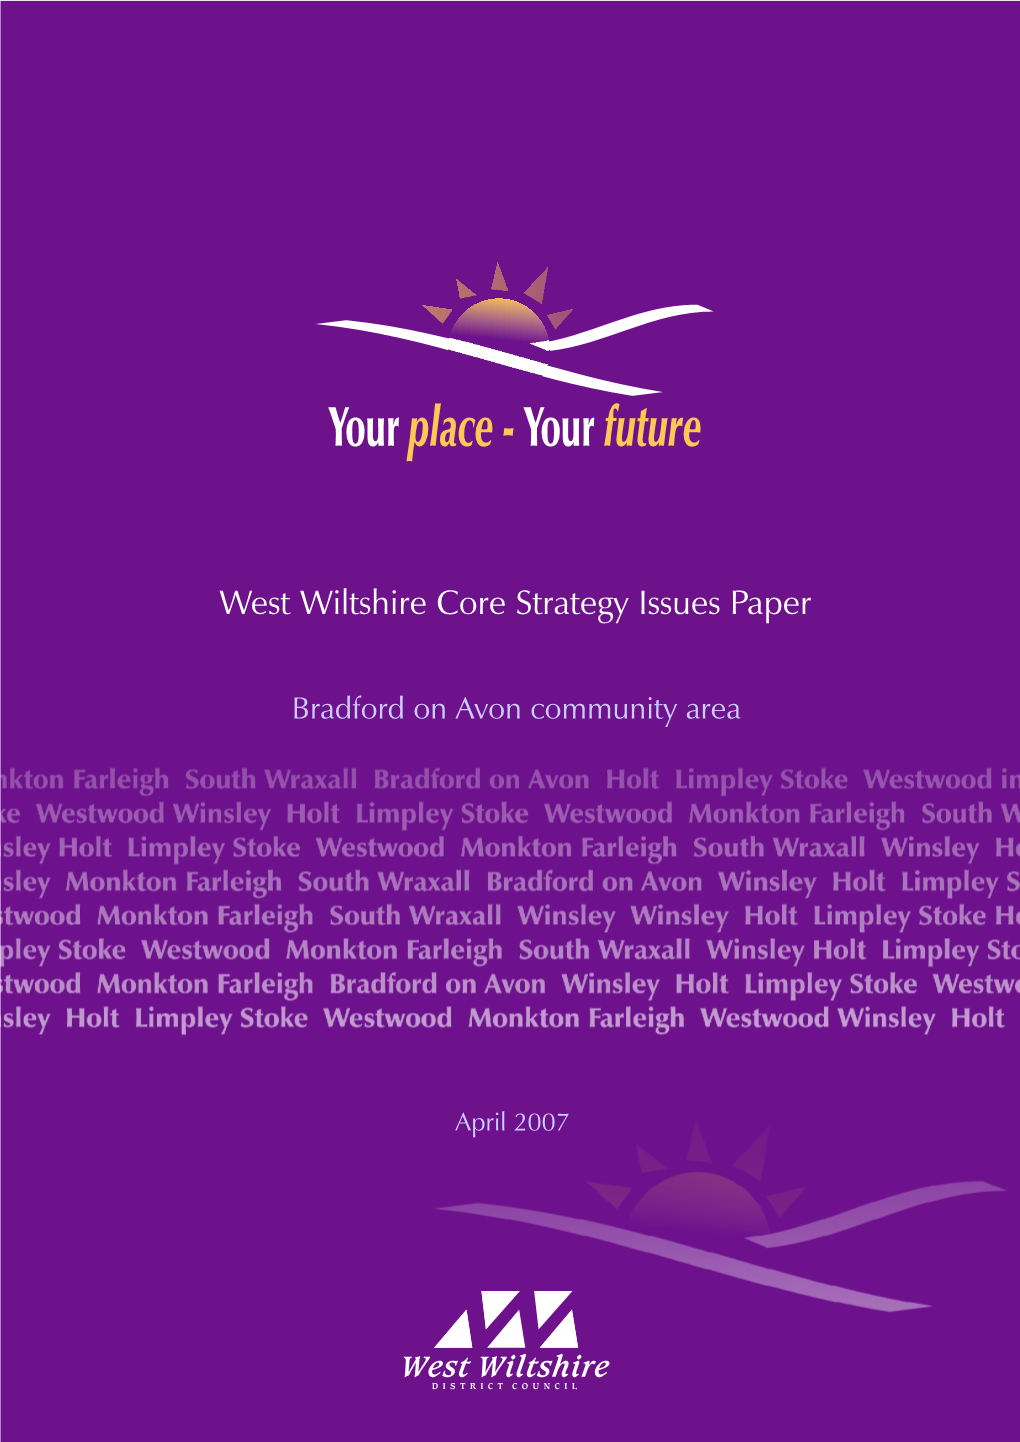 West Wiltshire Core Strategy Issues Paper